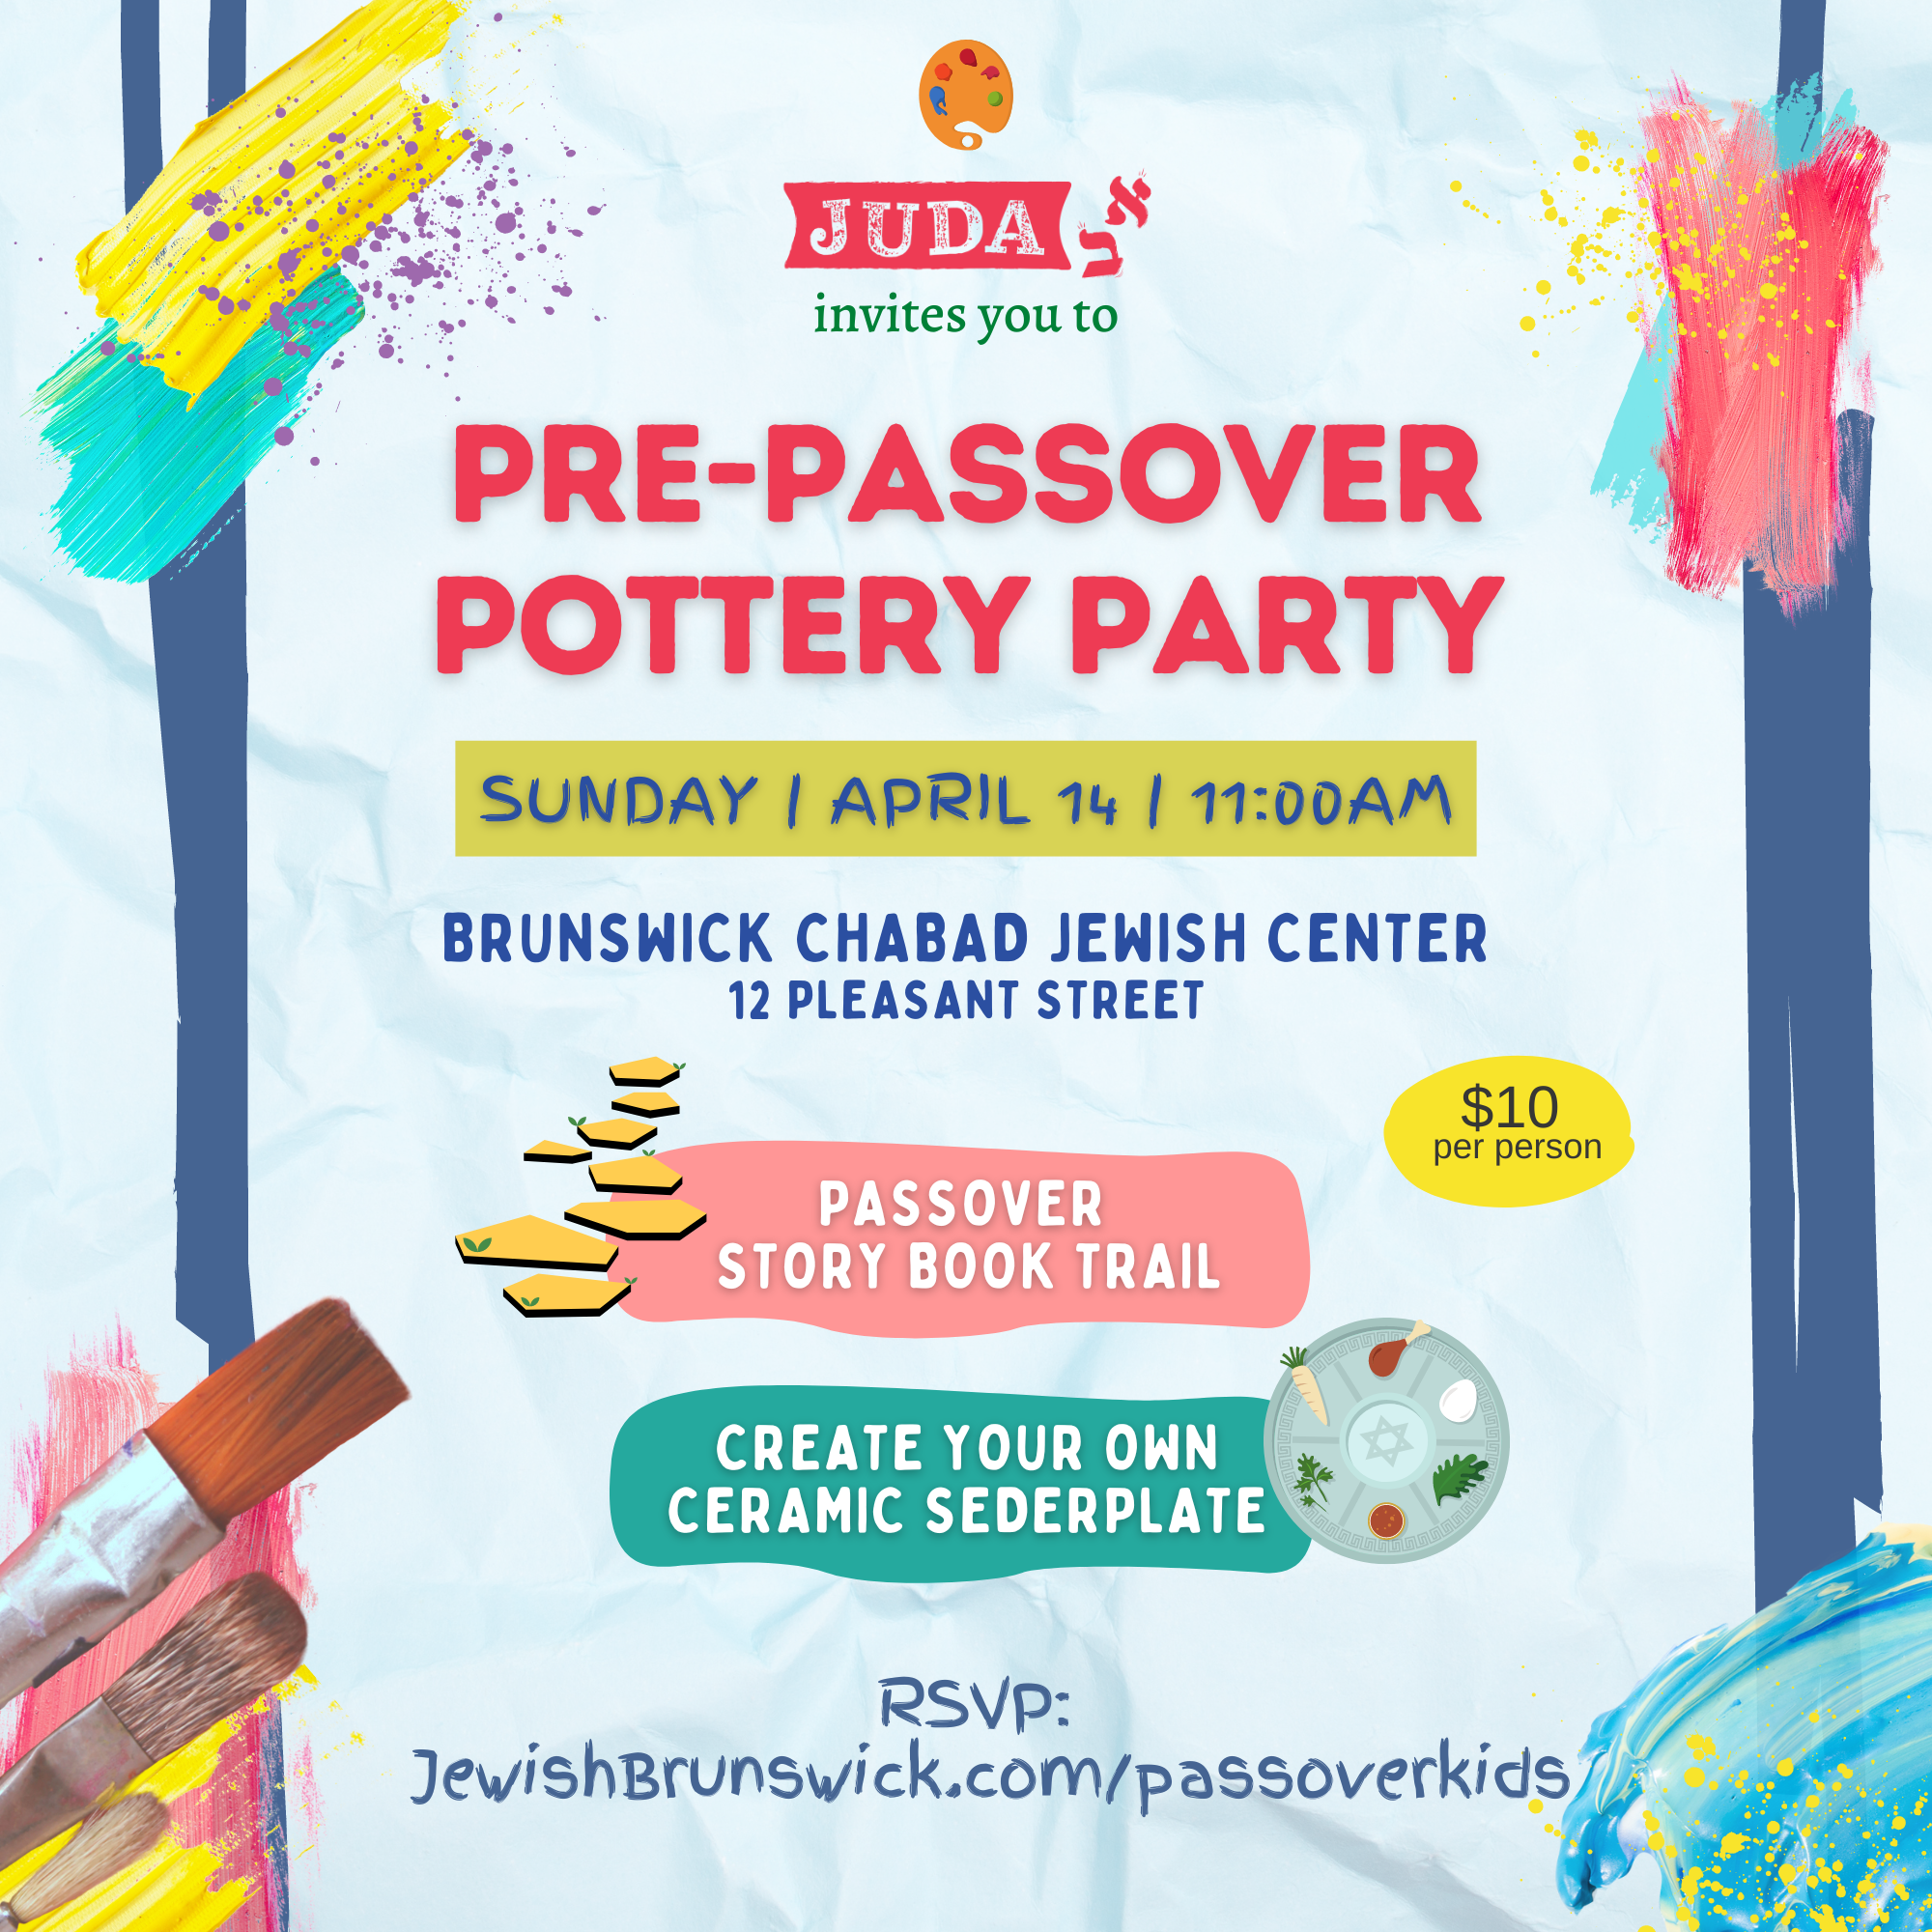 PRE PASSOVER POTTERY PARTY